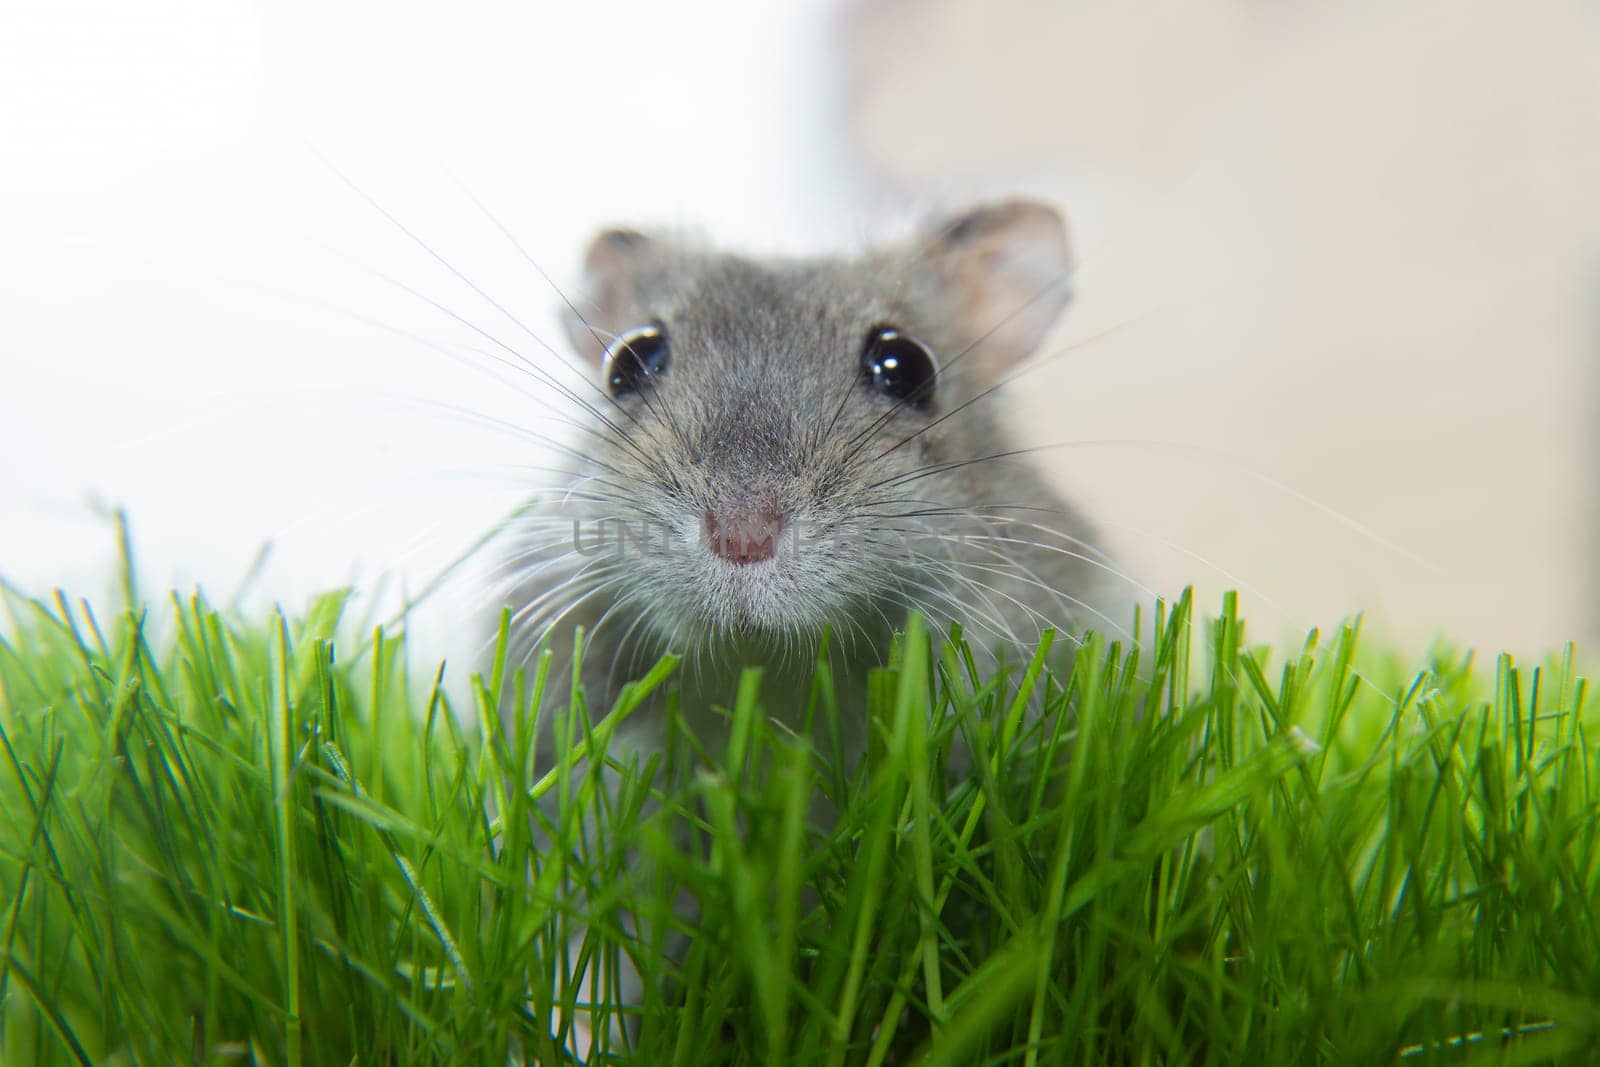 A curious hamster on the green grass. The observing muzzle is a small gray mouse by BetterPhoto